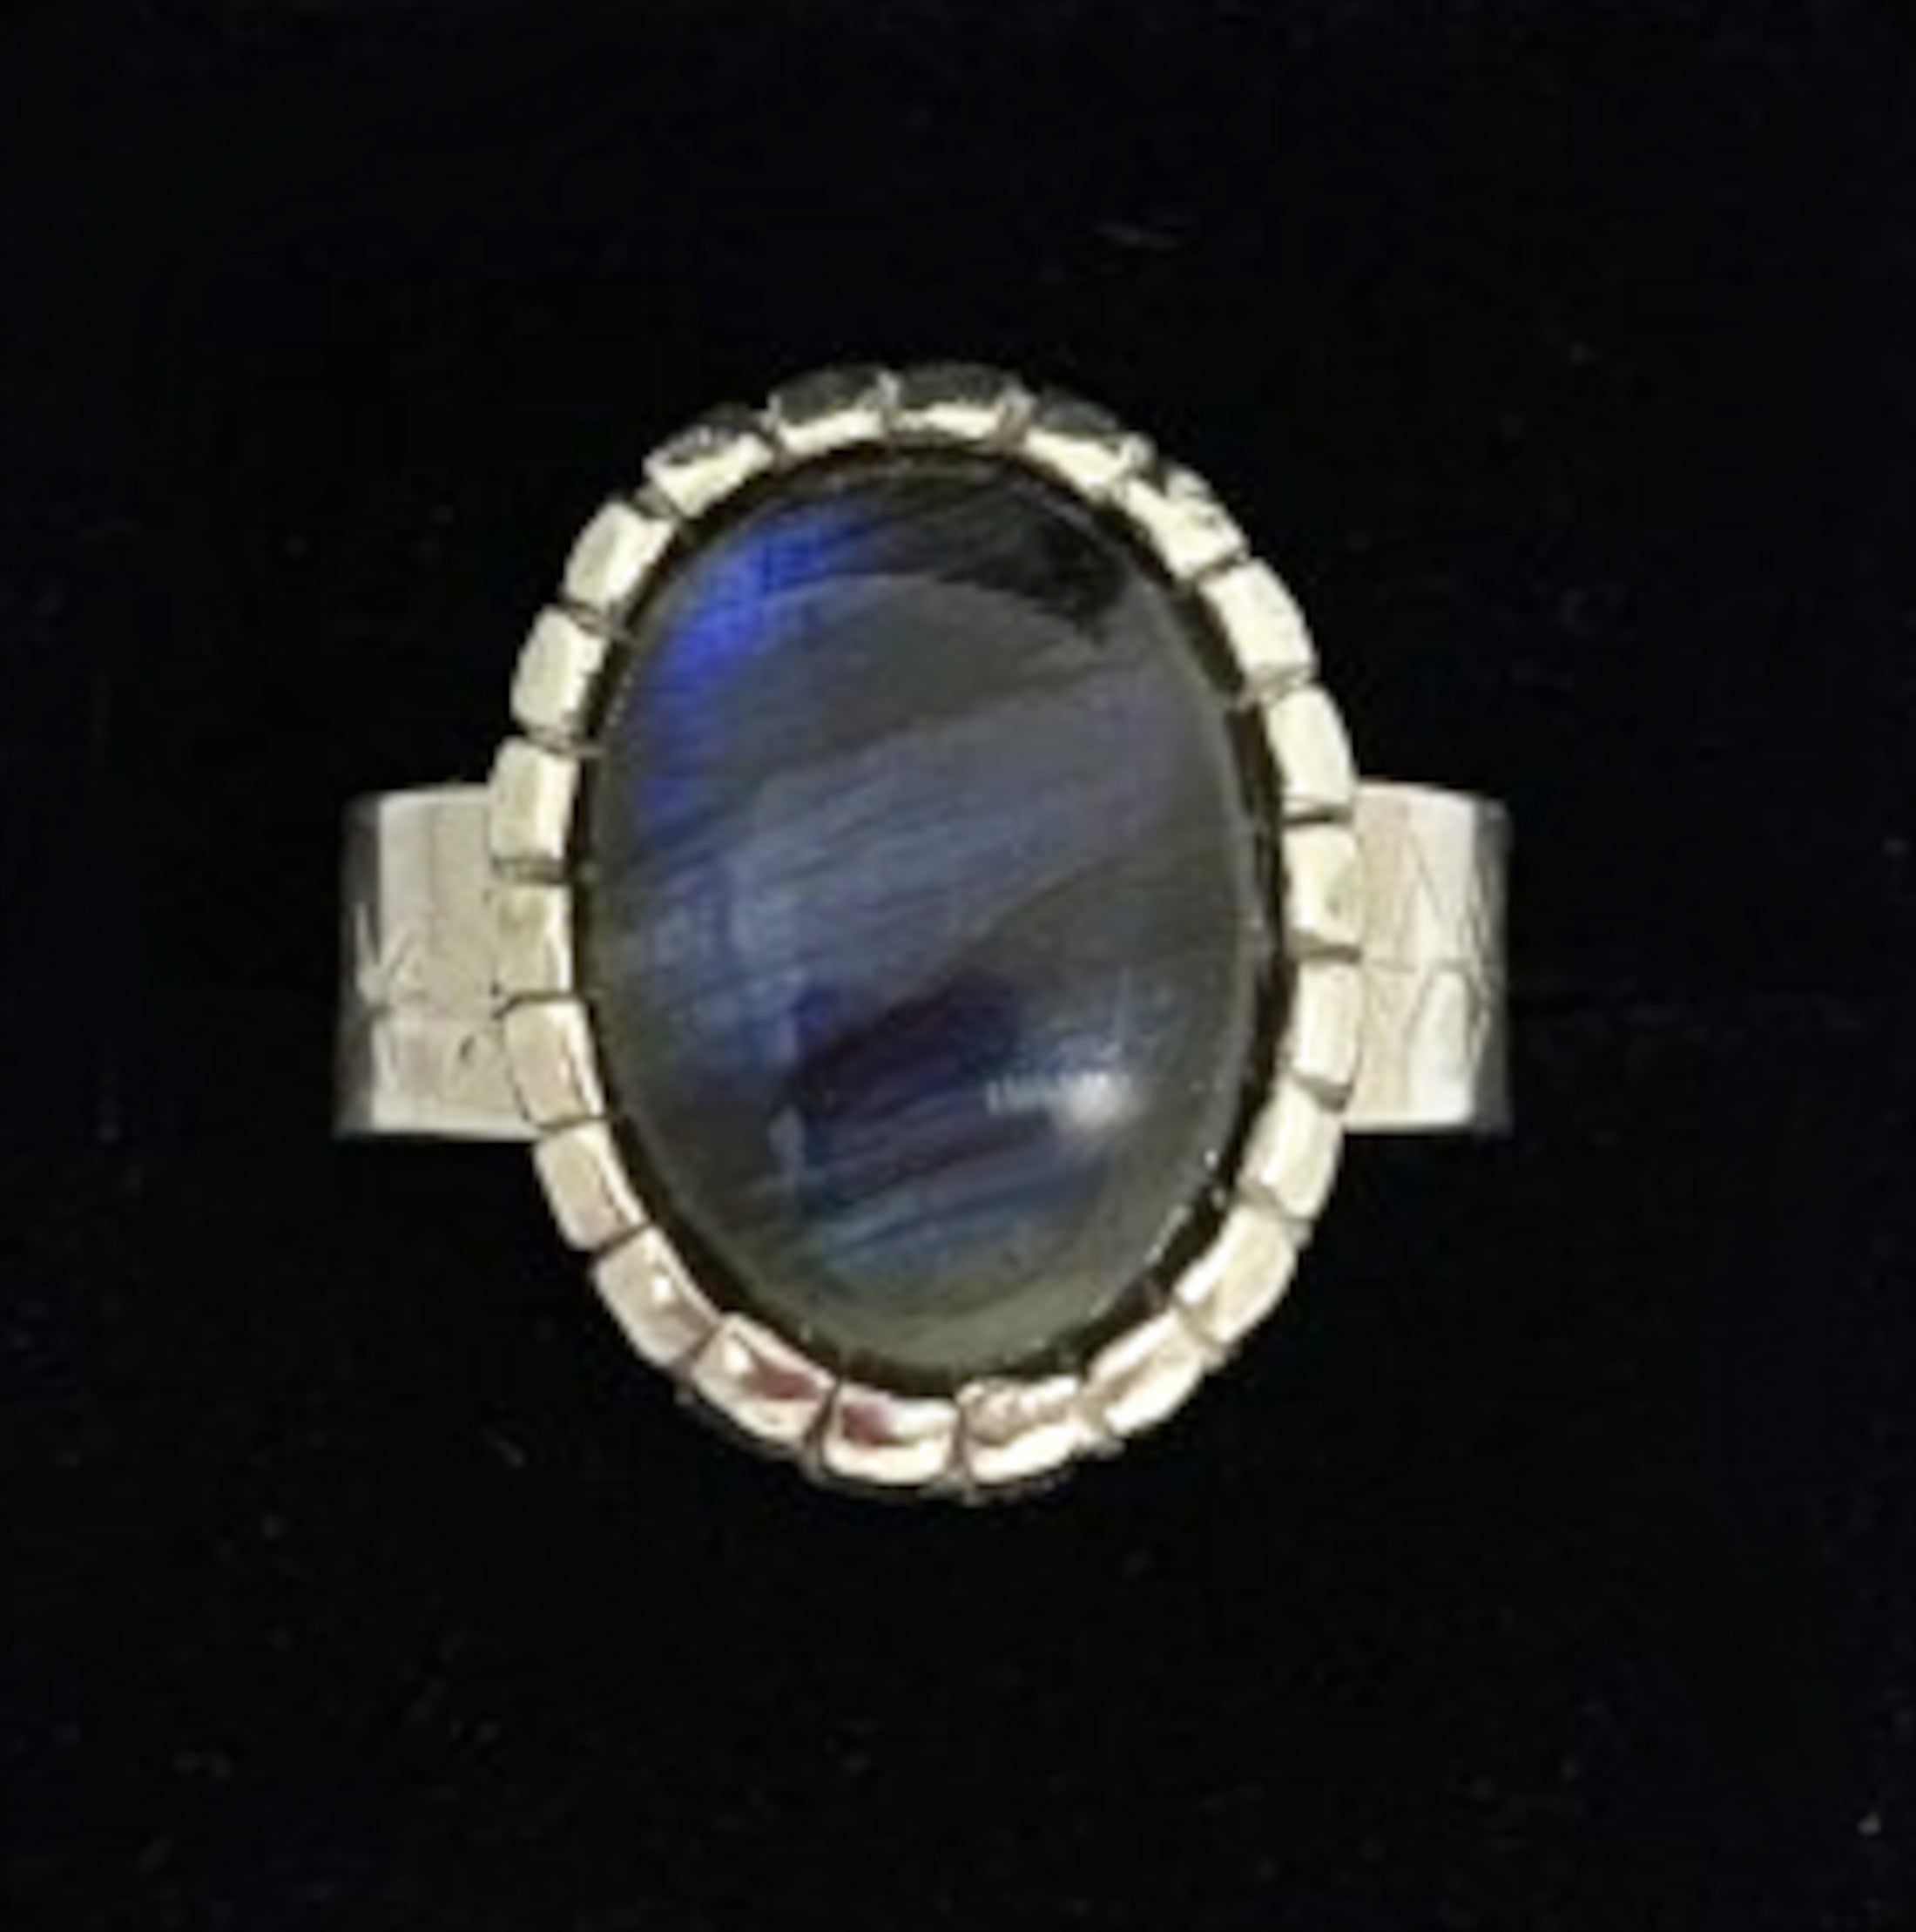 Labradorite Ring with Castellated Bezel in Sterling Silver - Size 9.5